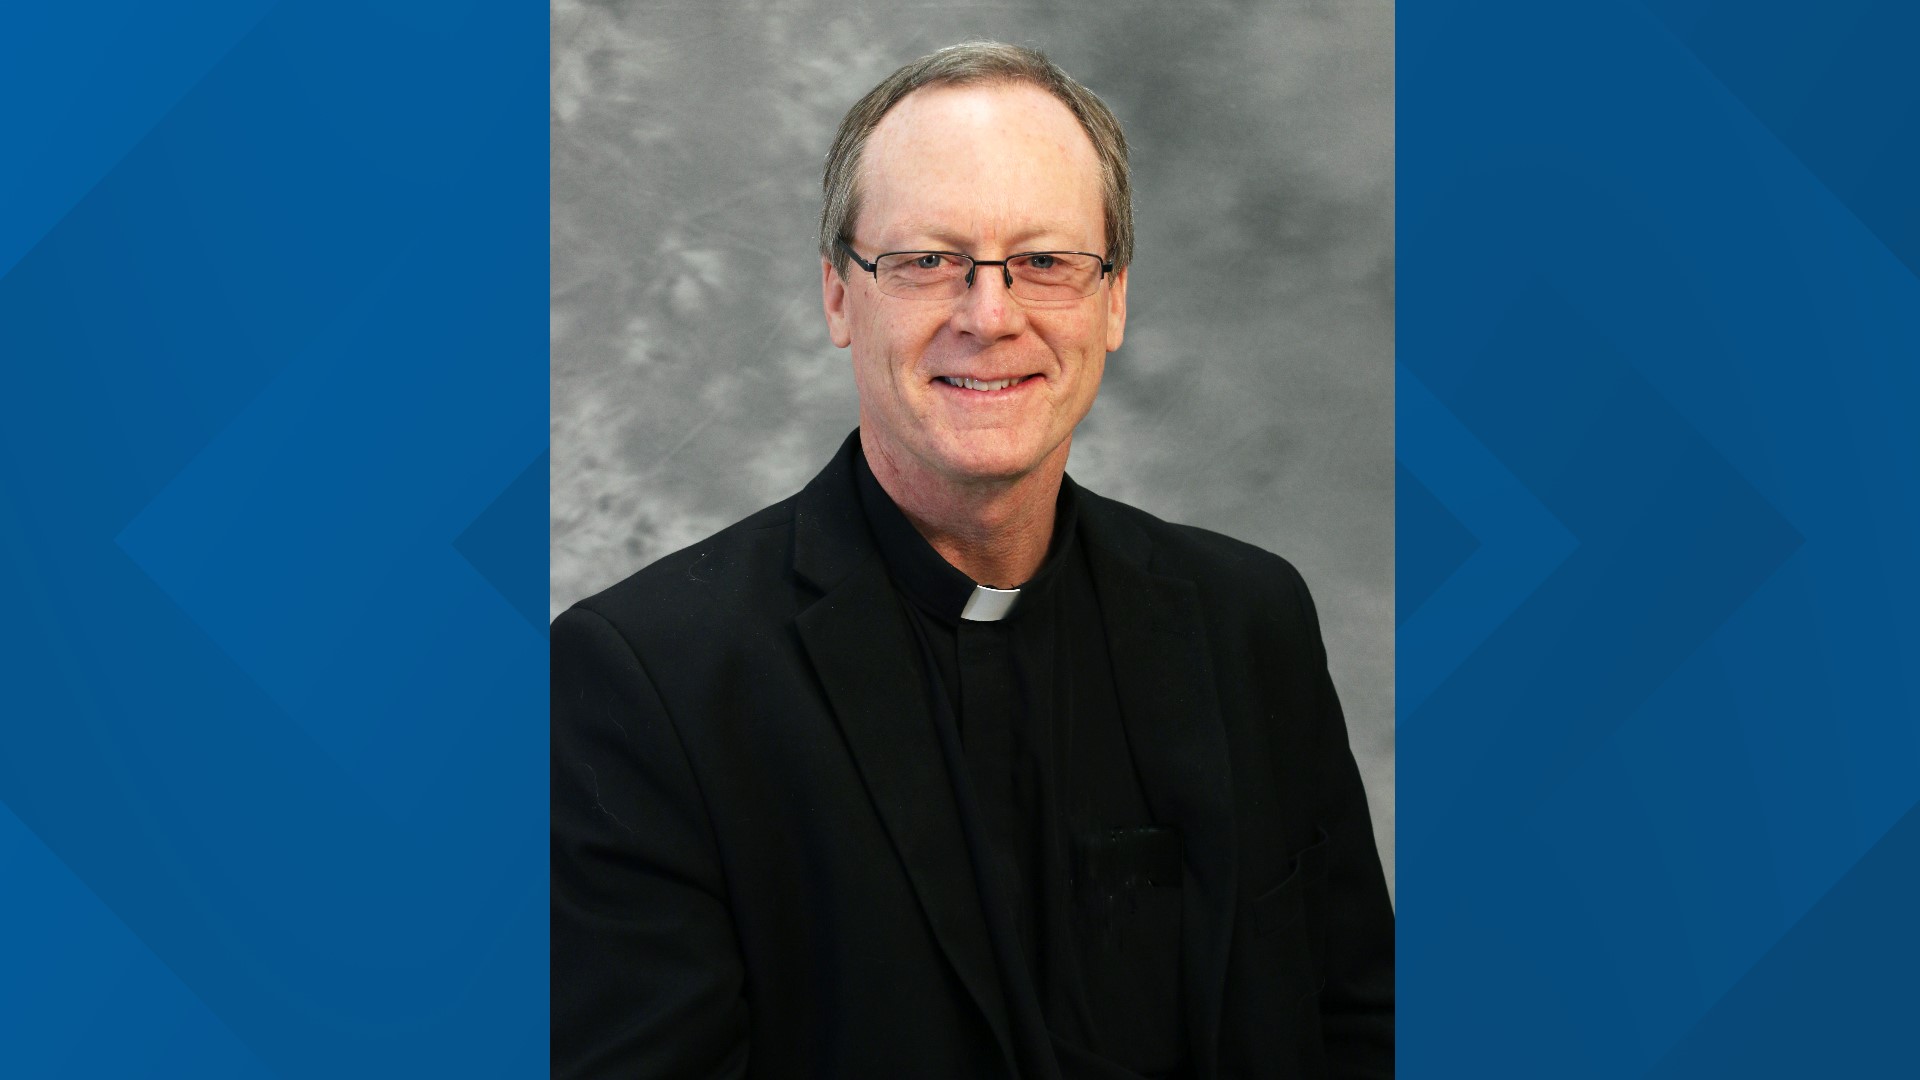 A pastor from our area has been appointed to be the sixth bishop of the Roman Catholic Diocese of Gaylord, Michigan.